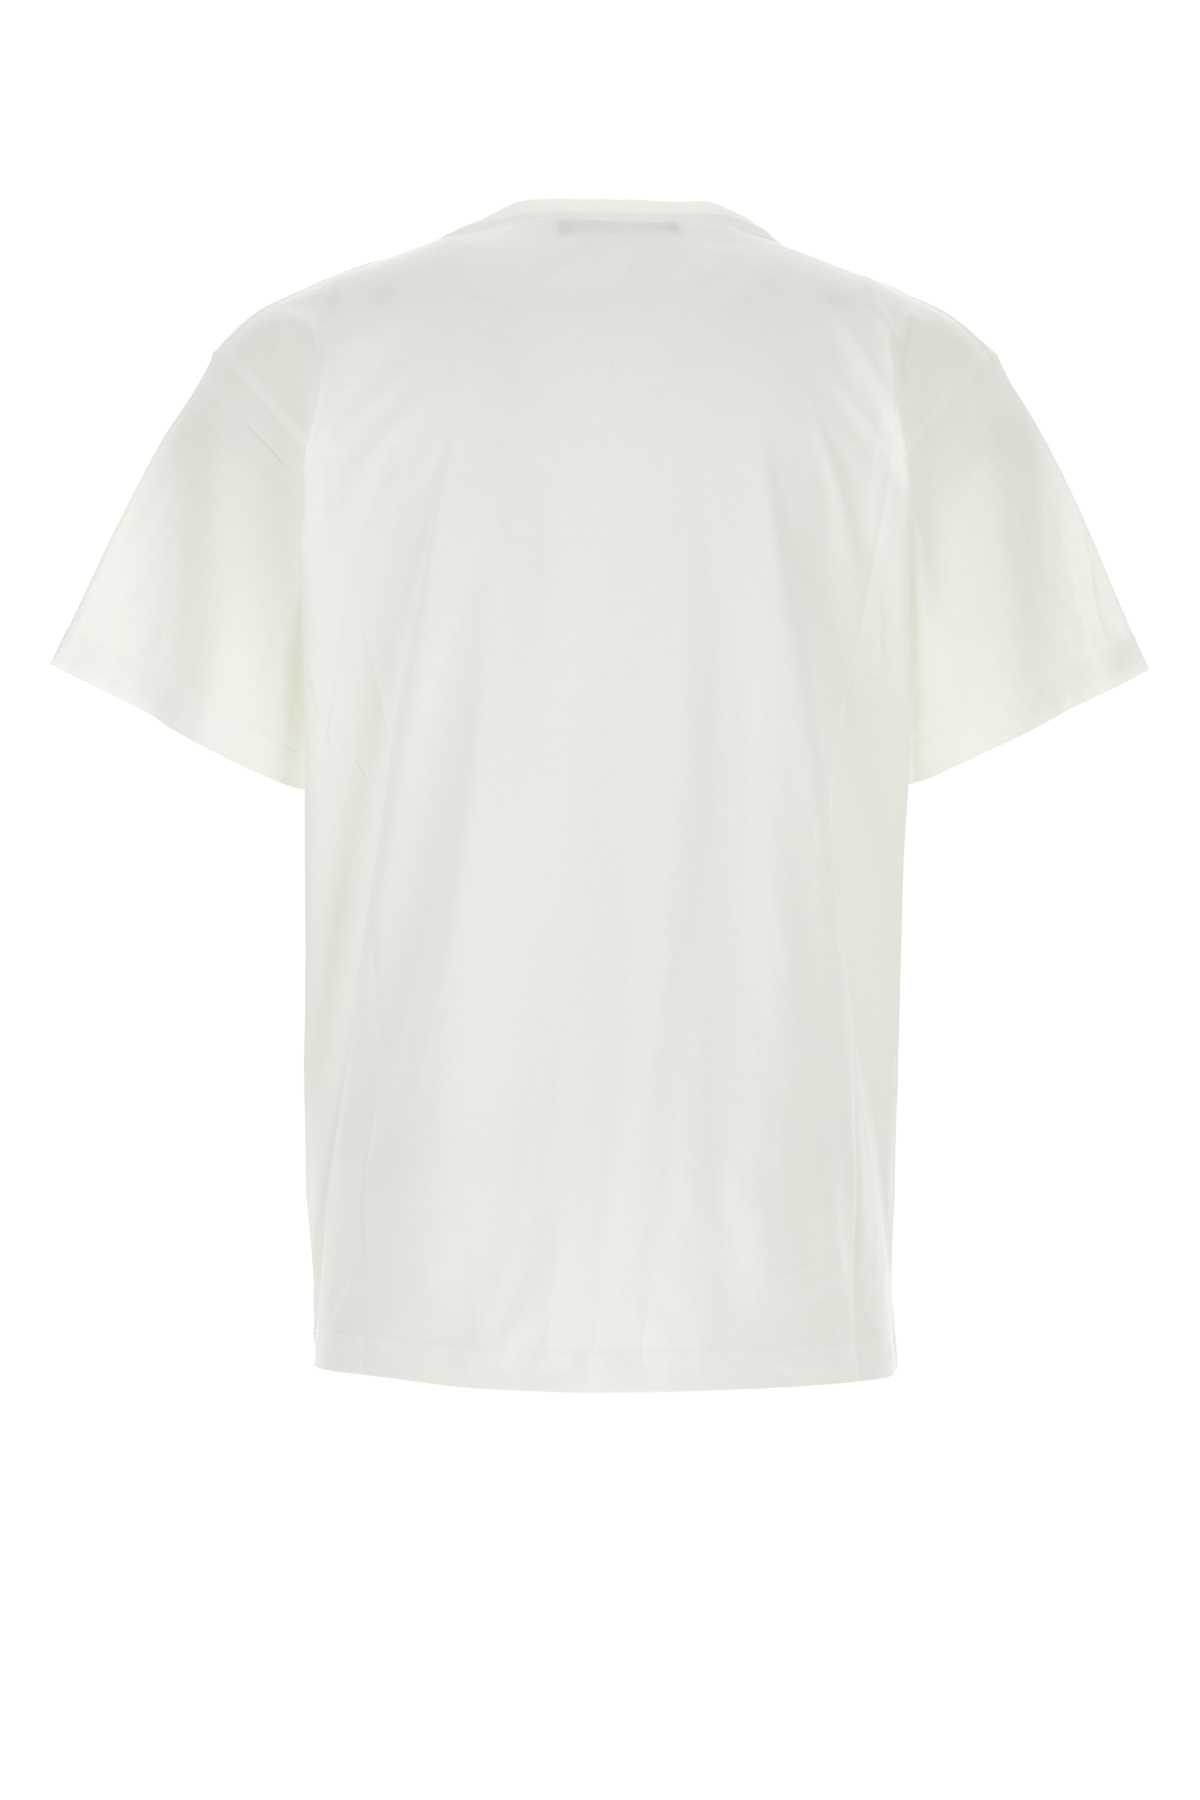 Y/project White Cotton T-shirt In Optic White